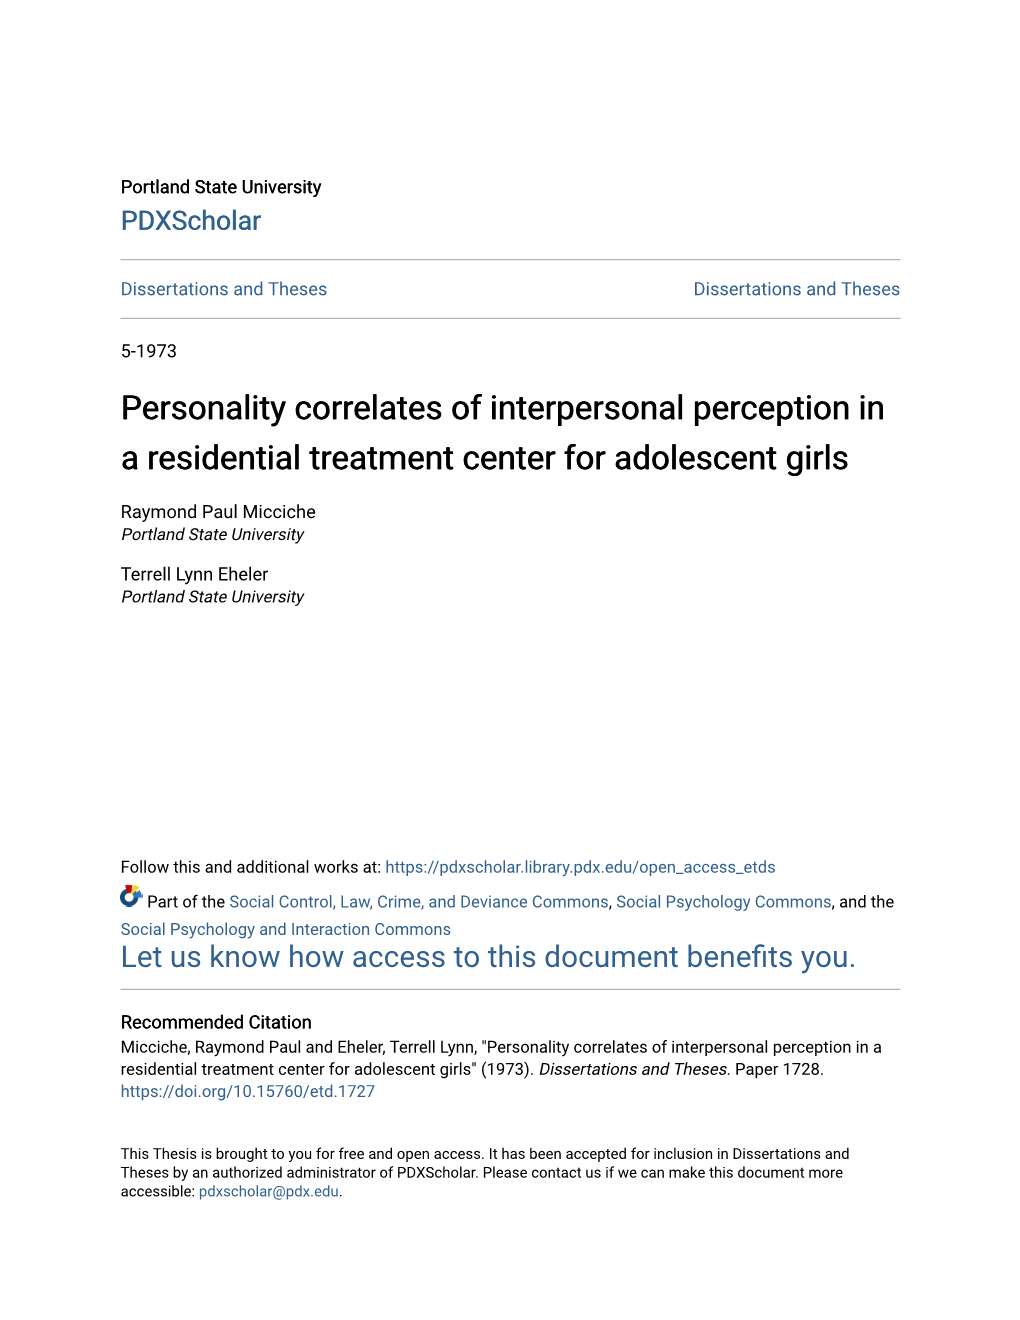 Personality Correlates of Interpersonal Perception in a Residential Treatment Center for Adolescent Girls